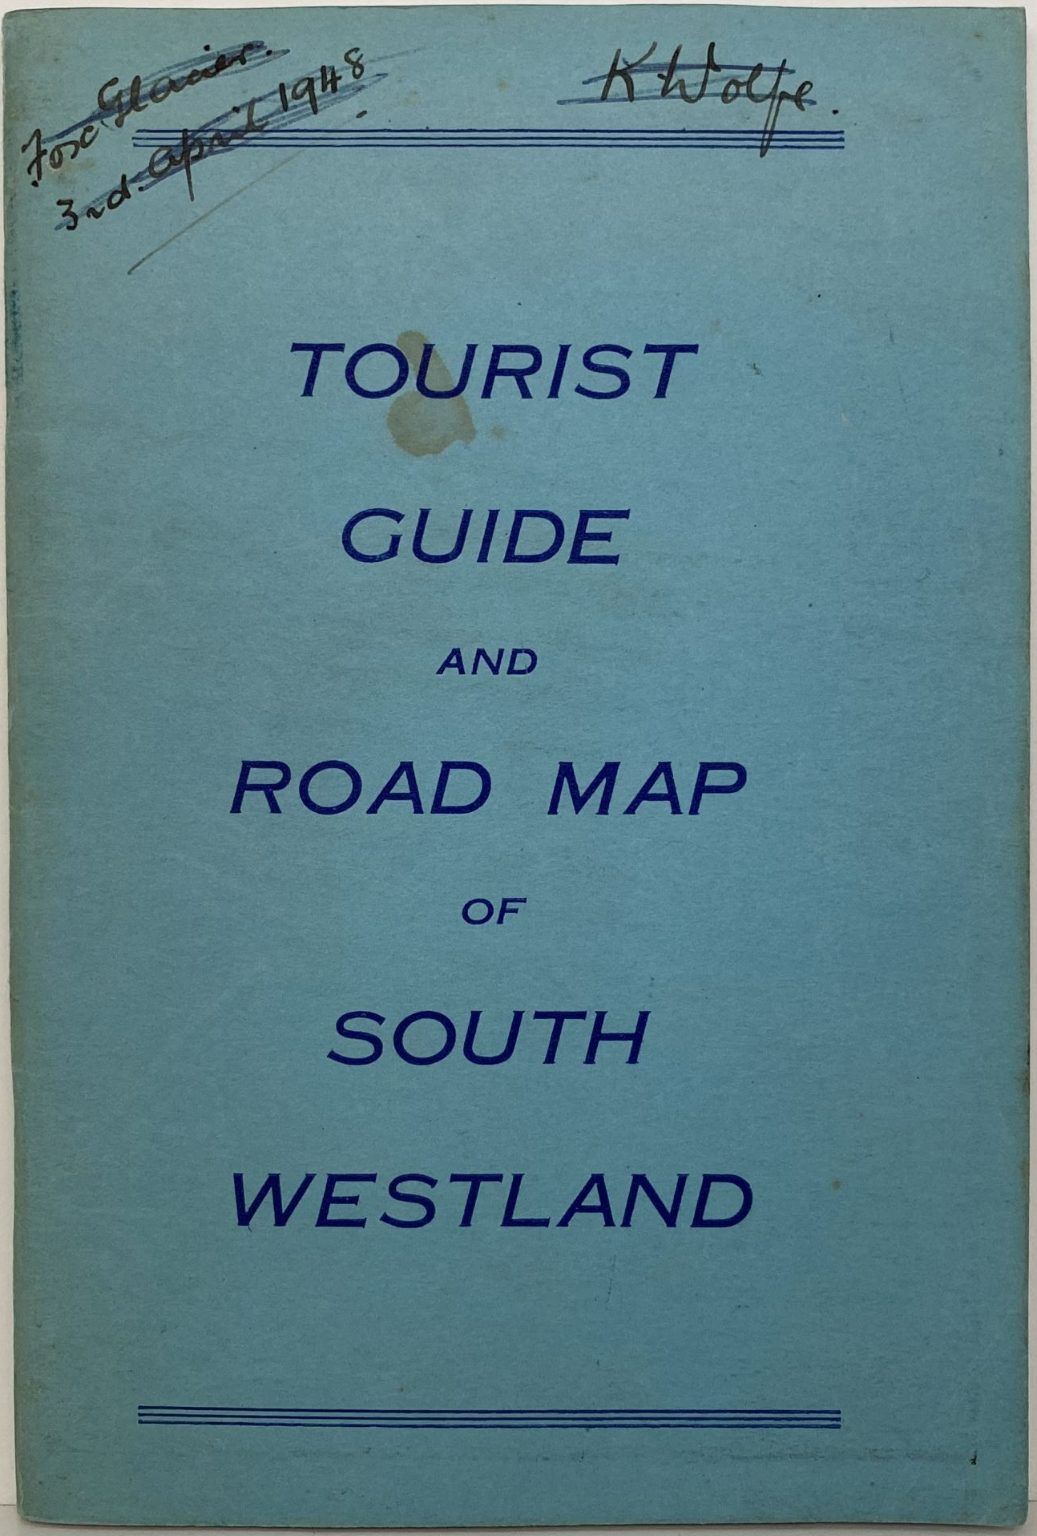 TOURIST GUIDE and ROAD MAP of SOUTH WESTLAND